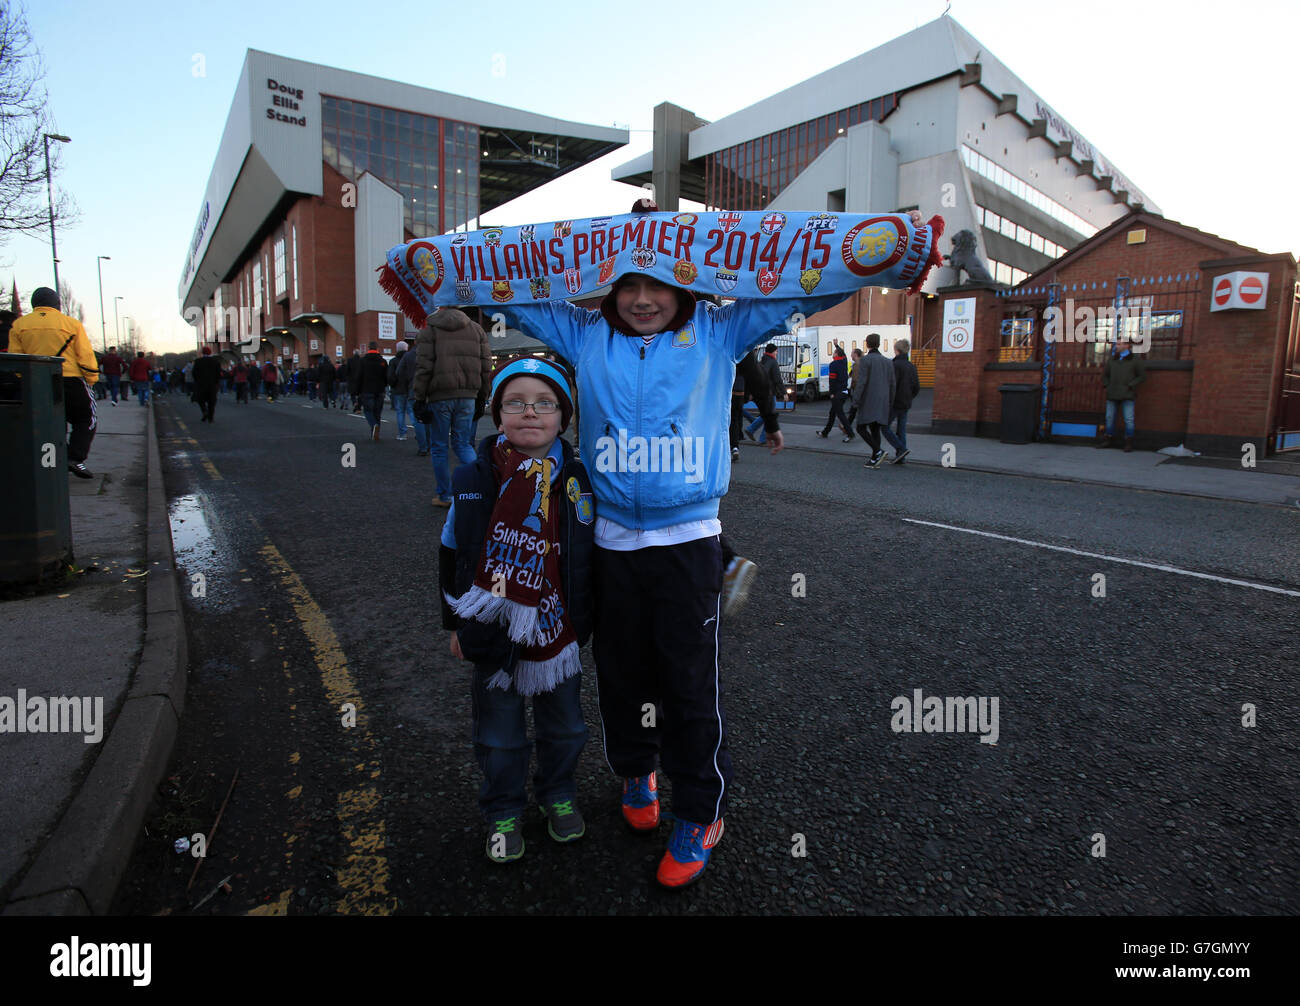 Aston Villa fans Austin and Jensen from great Wyrley prior to the Barclays Premier League match at Villa Park, Birmingham. Stock Photo